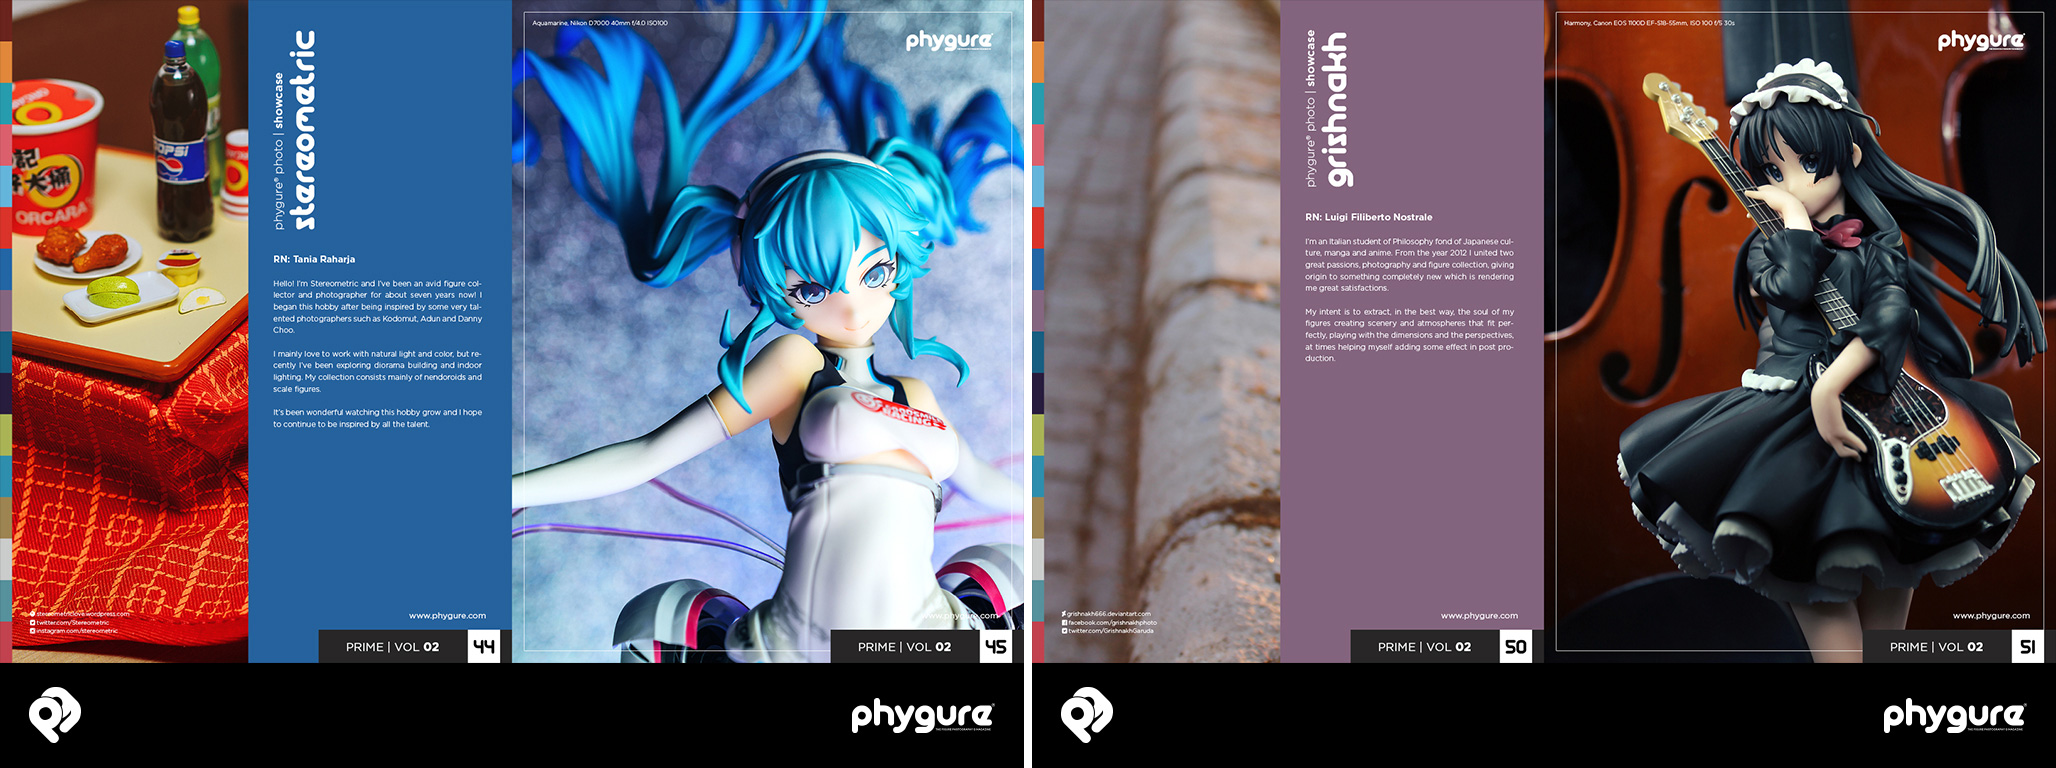 Phygure® Prime Vol. 02 Now Available! (2)